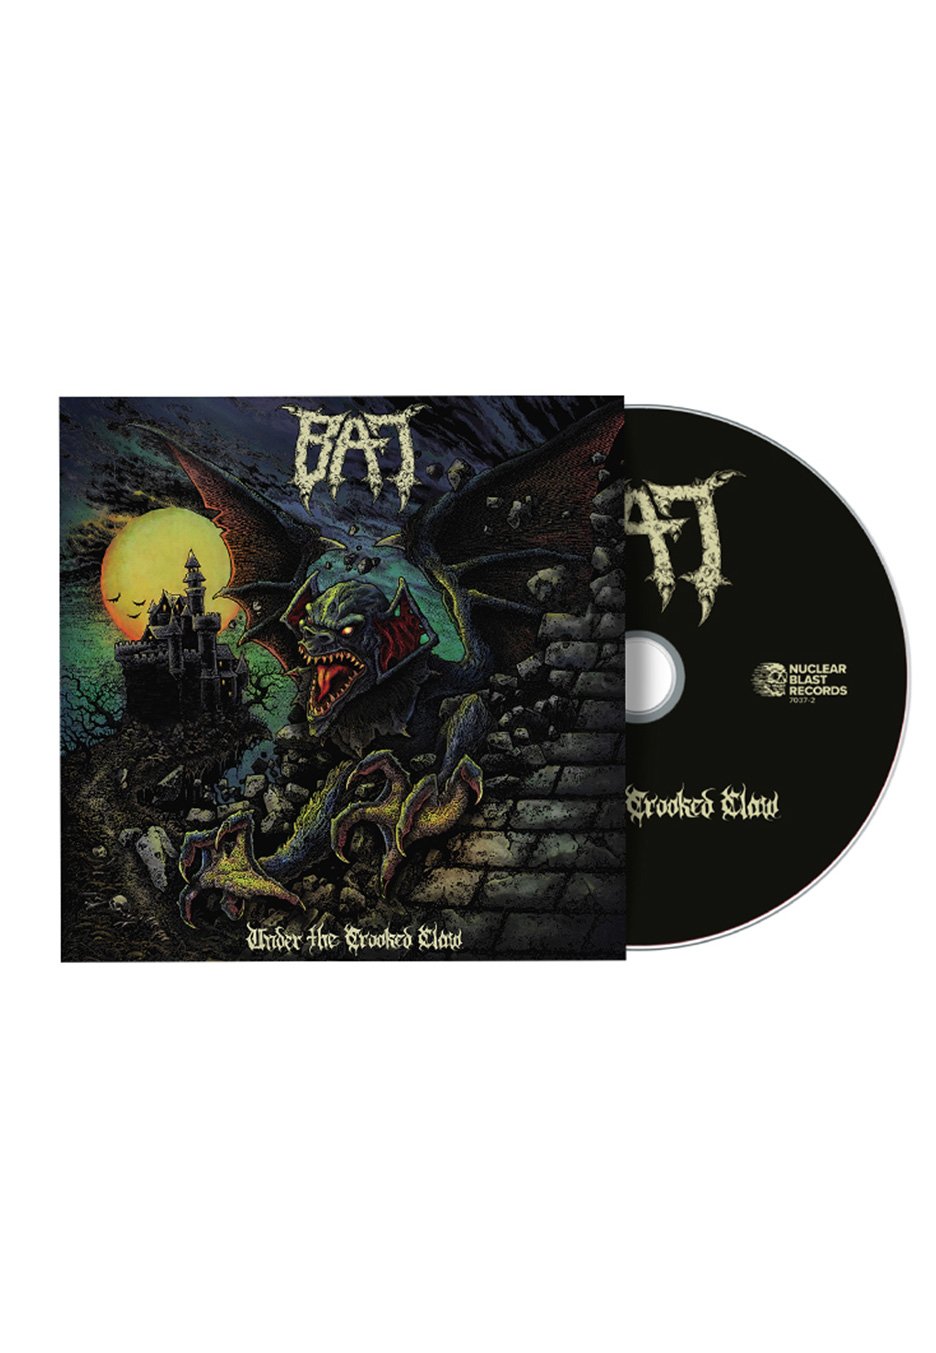 Bat - Under The Crooked Claw - CD